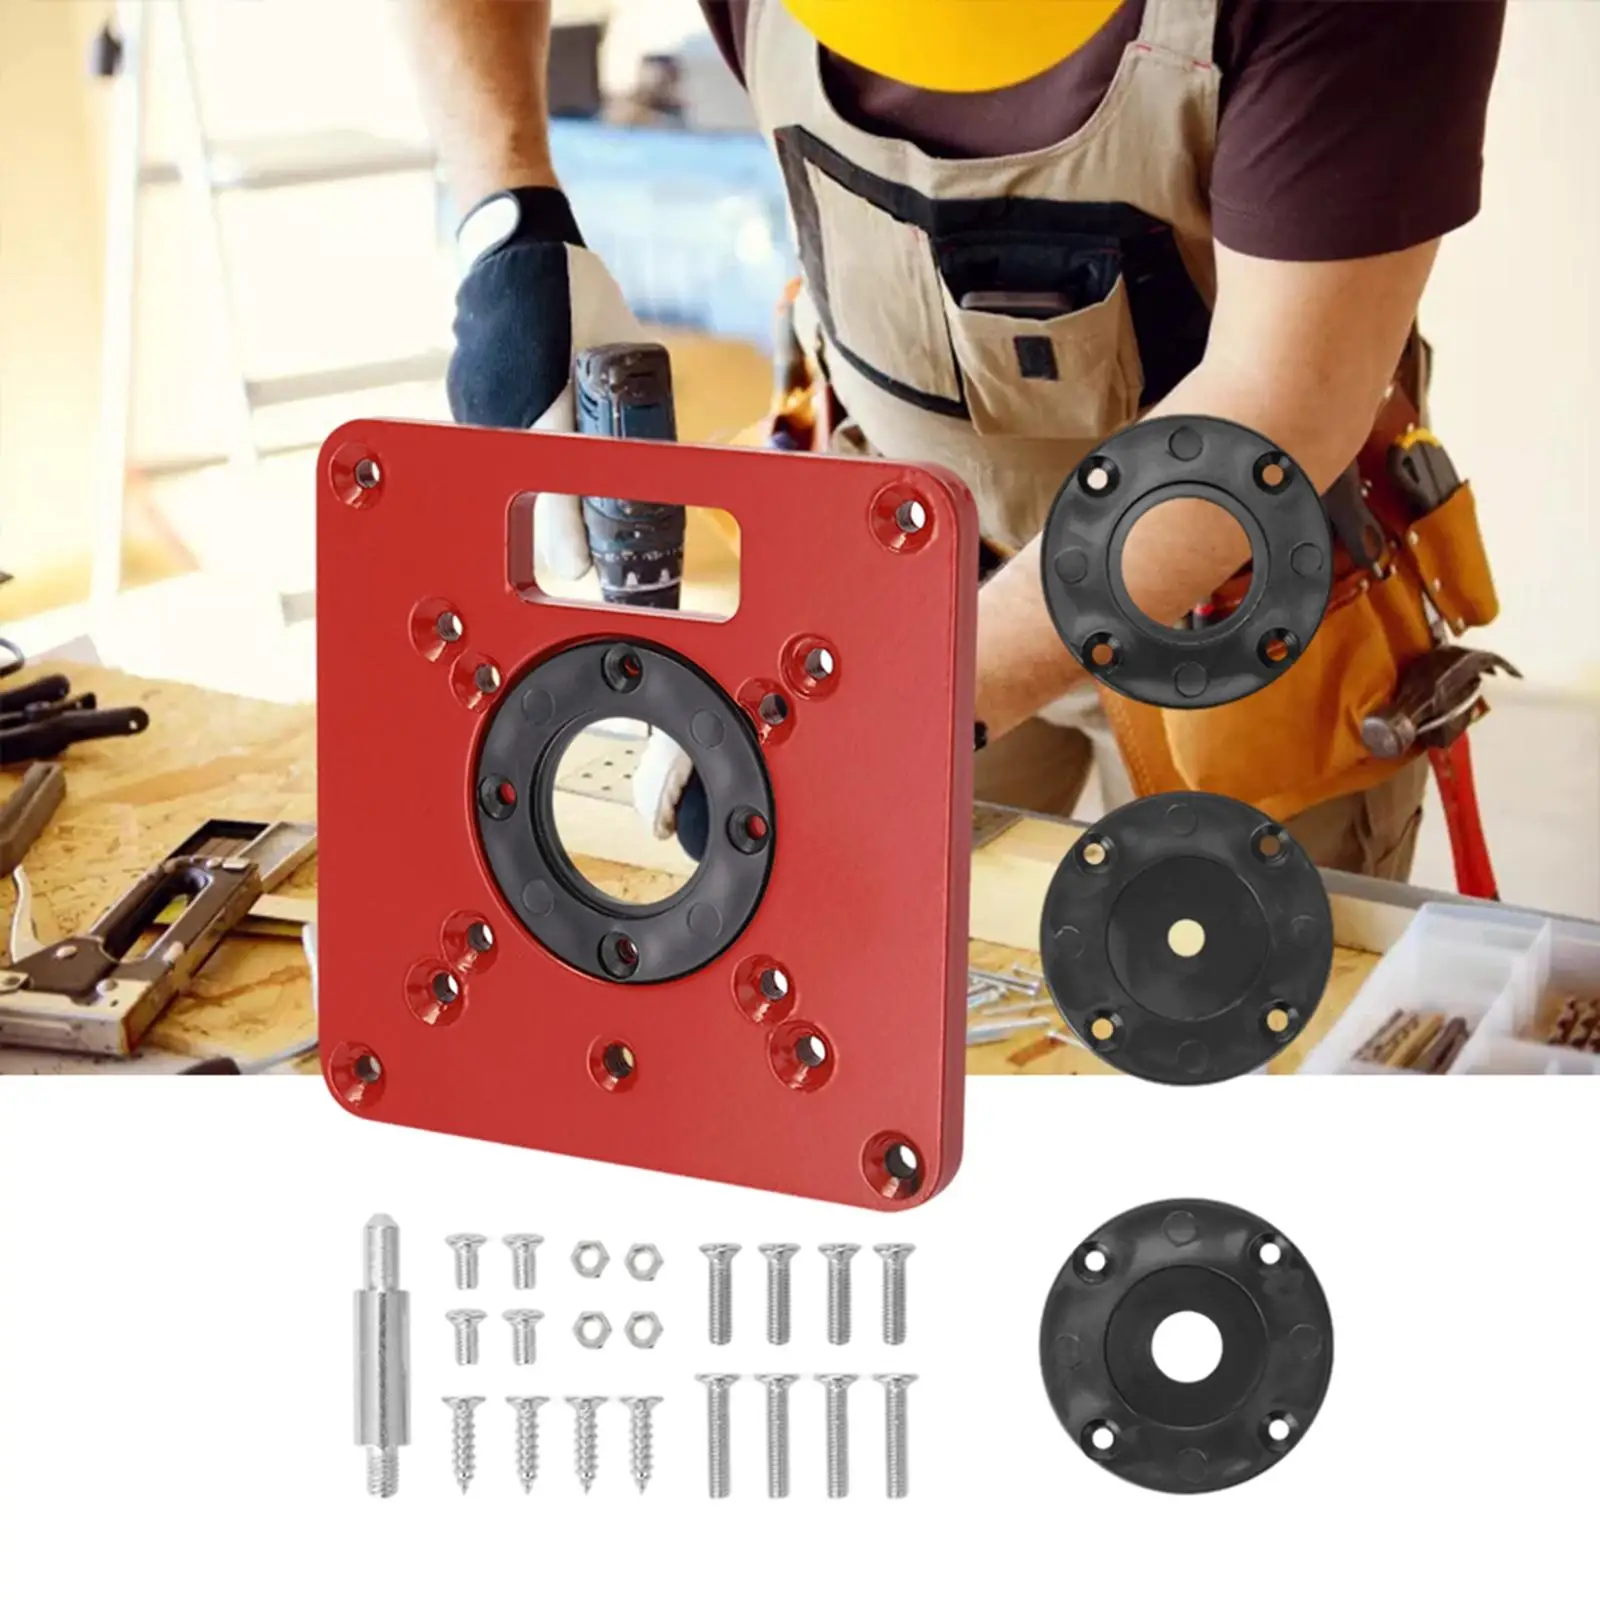 Multi-Functional Router Table Insert Plate with 4 Rings Woodworking Benches for DIY Kit